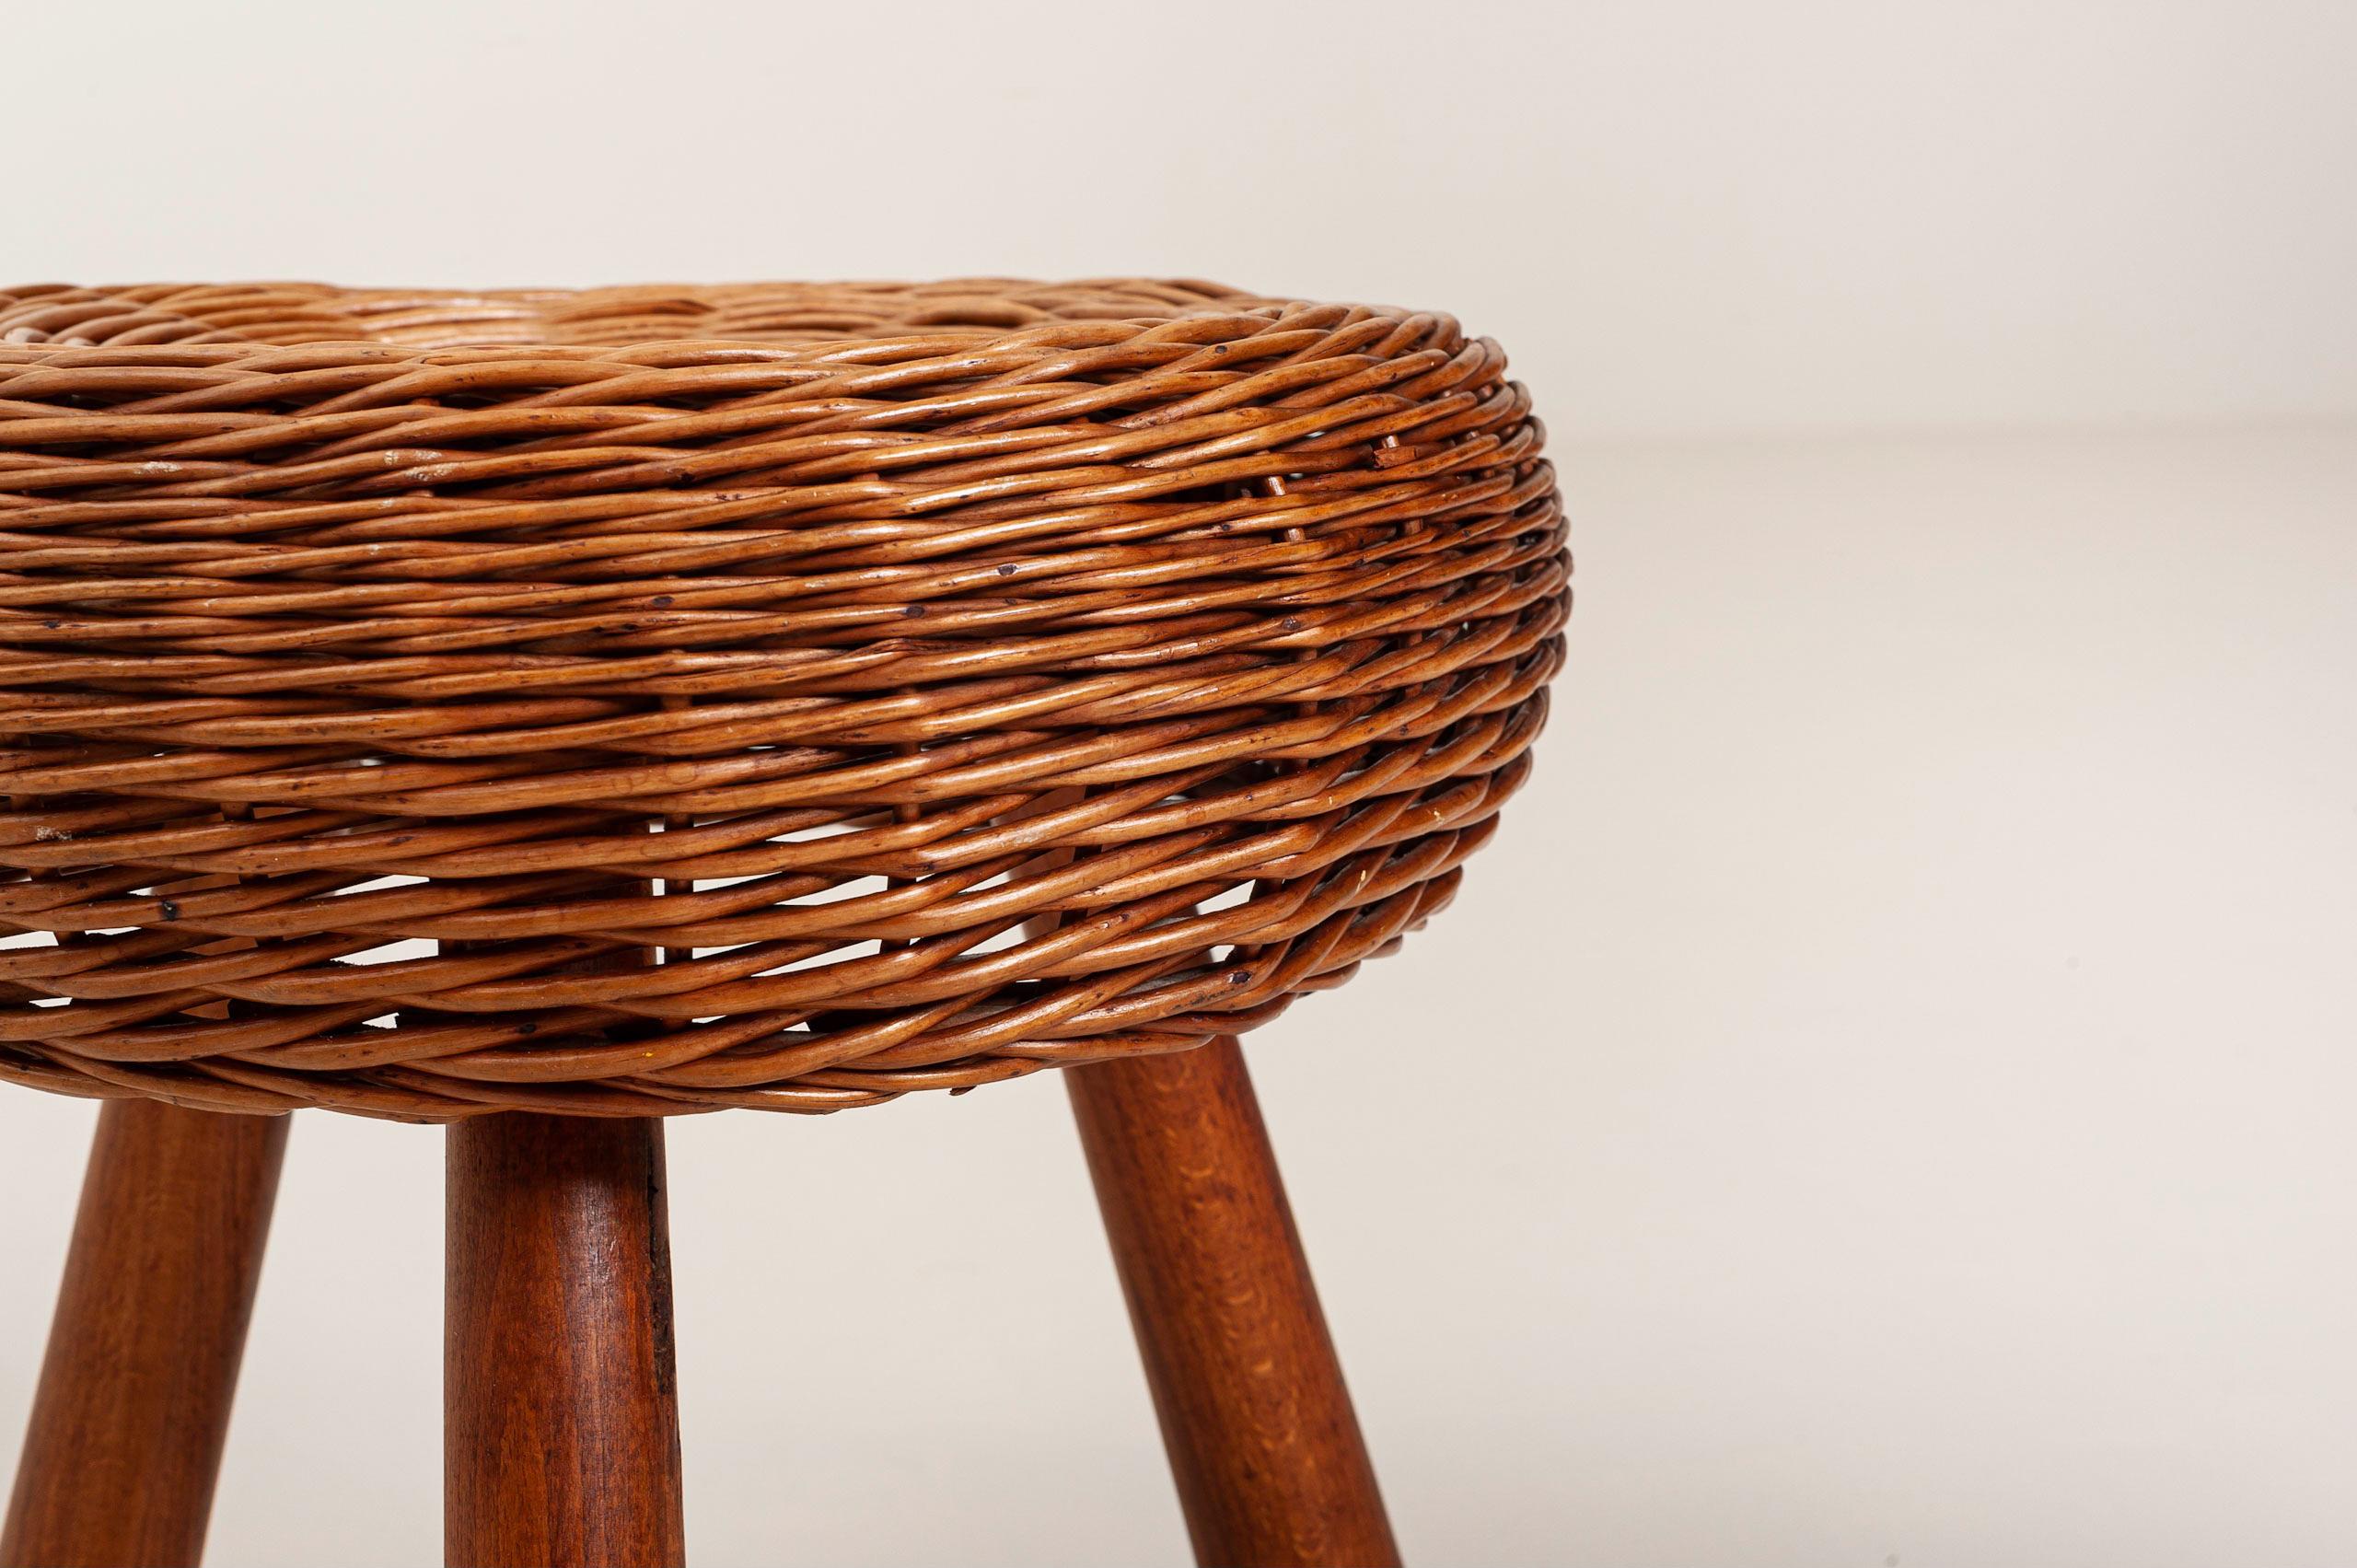 Caning Tony Paul Attributed Low Stools, Woven Wicker, Solid Beech, United States, 1950s For Sale